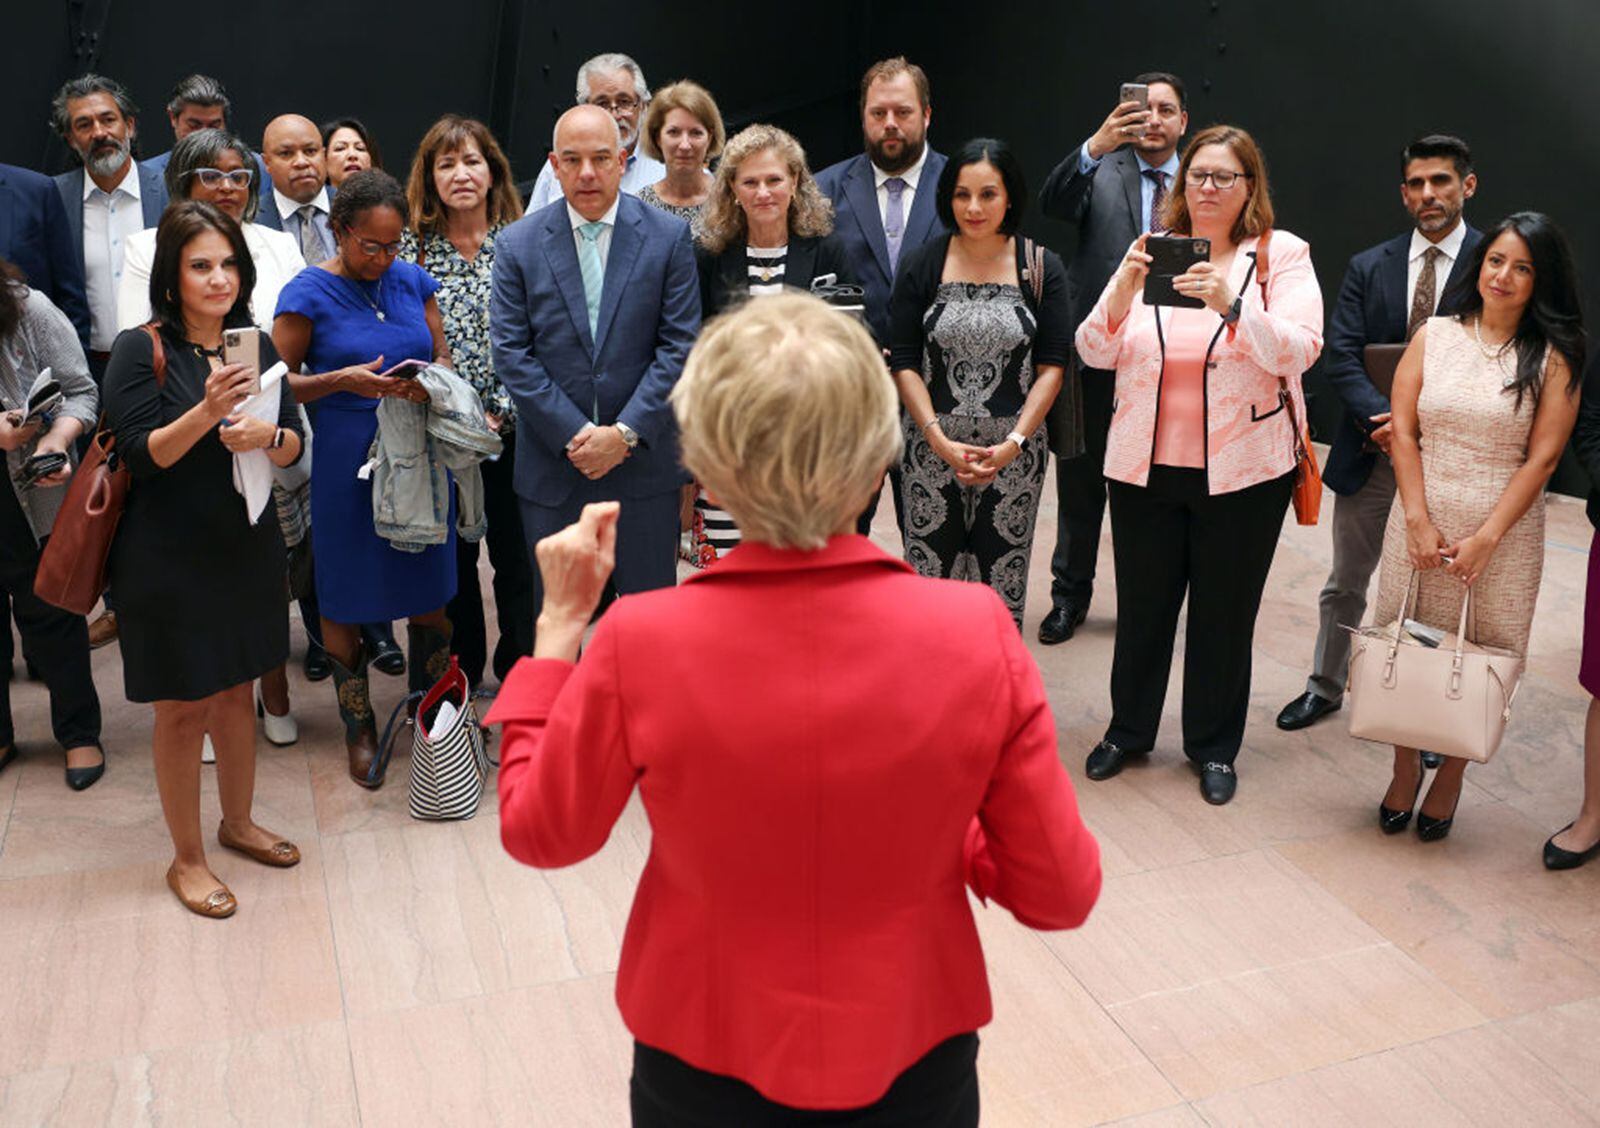 Sen. Elizabeth Warren, D-Mass., addressed Texas House Democrats as they met with senators on Capitol Hill on July 14, 2021. More than 60 Democrats left the state to block a voting restrictions bill and deny a Republican quorum.